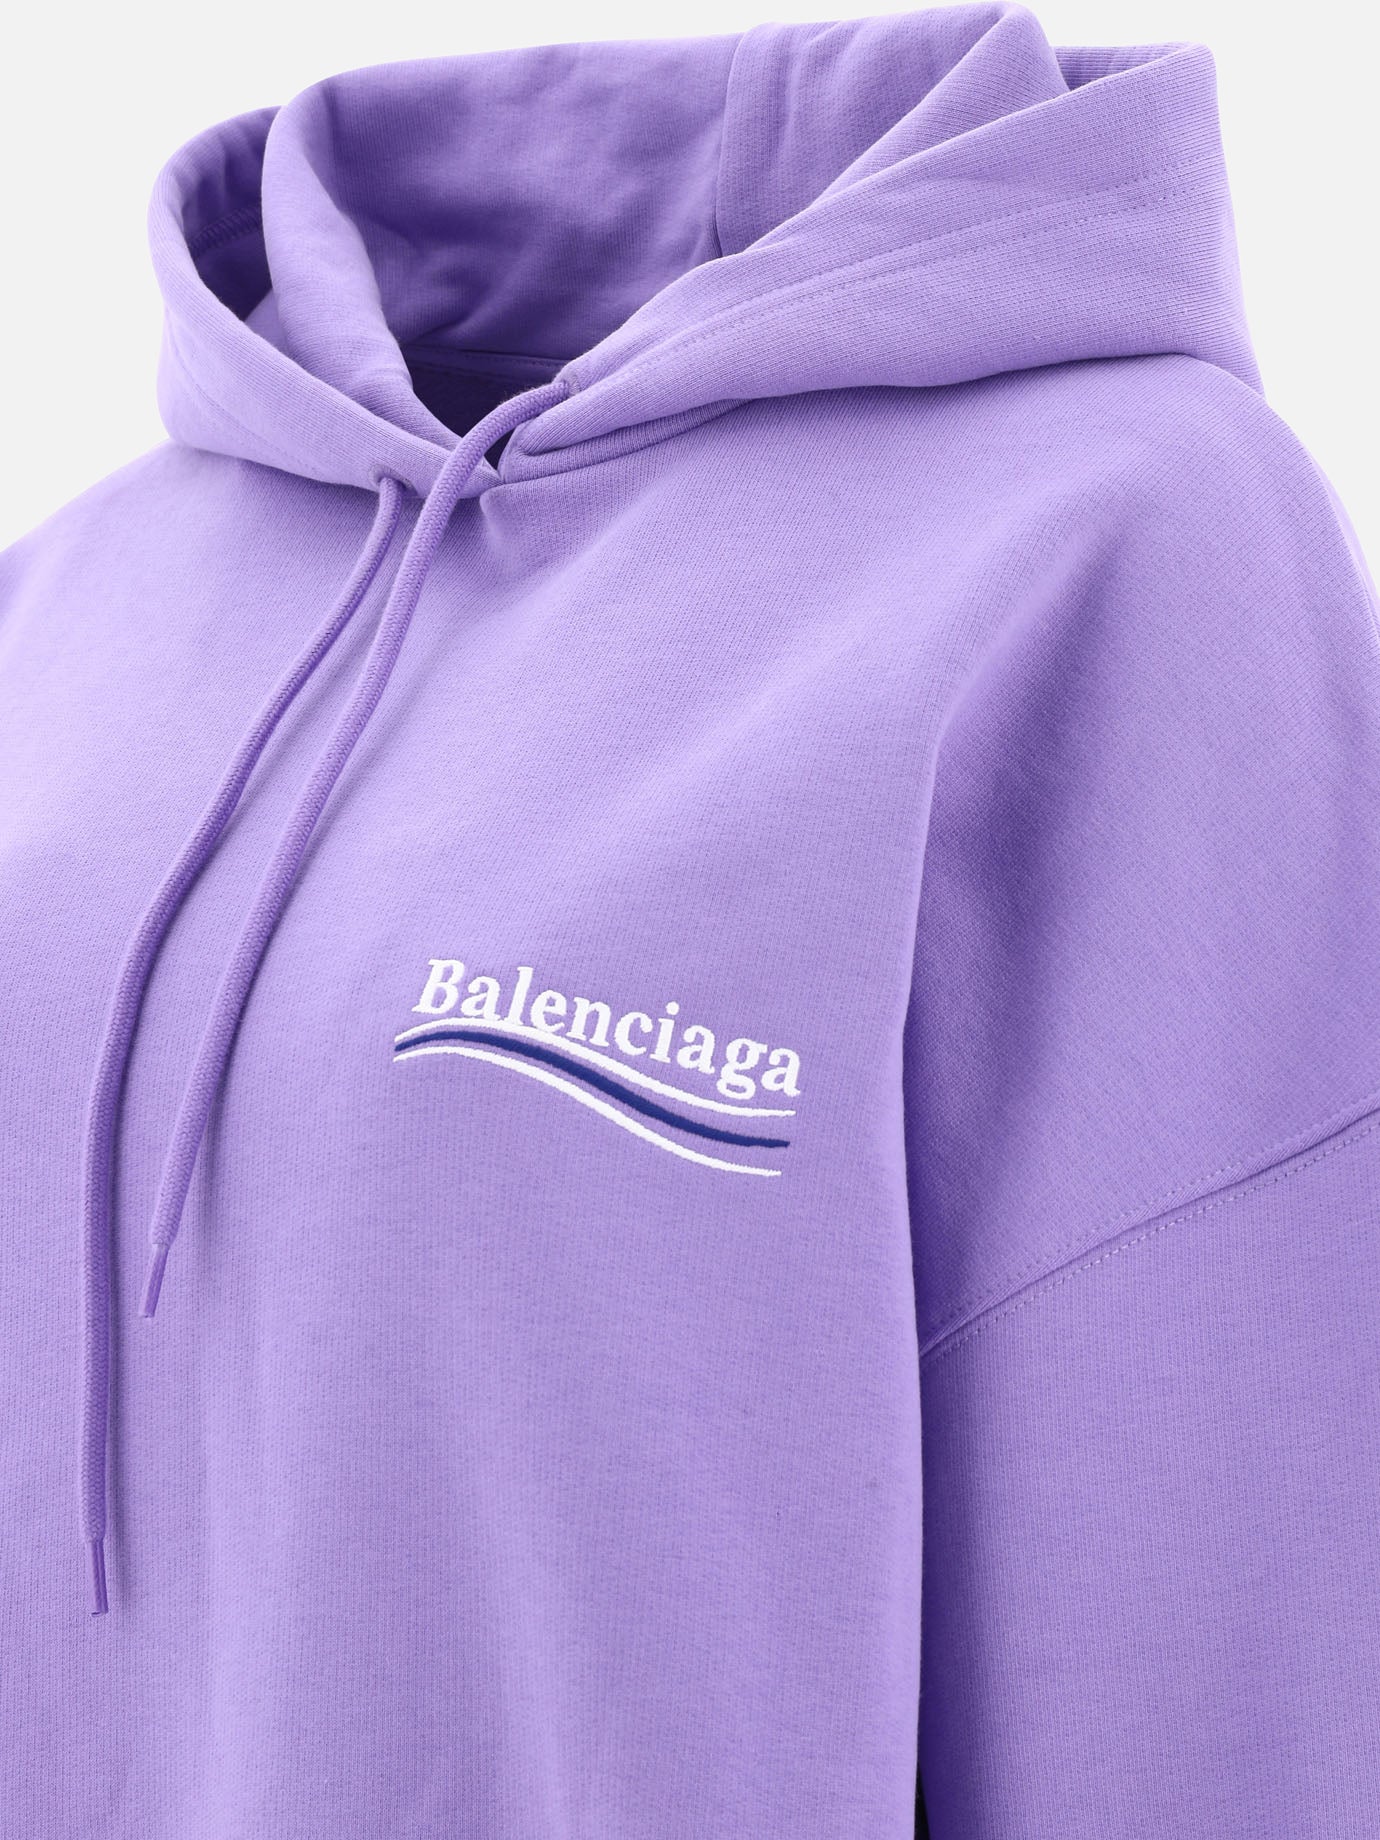 "Political Campaign" hoodie